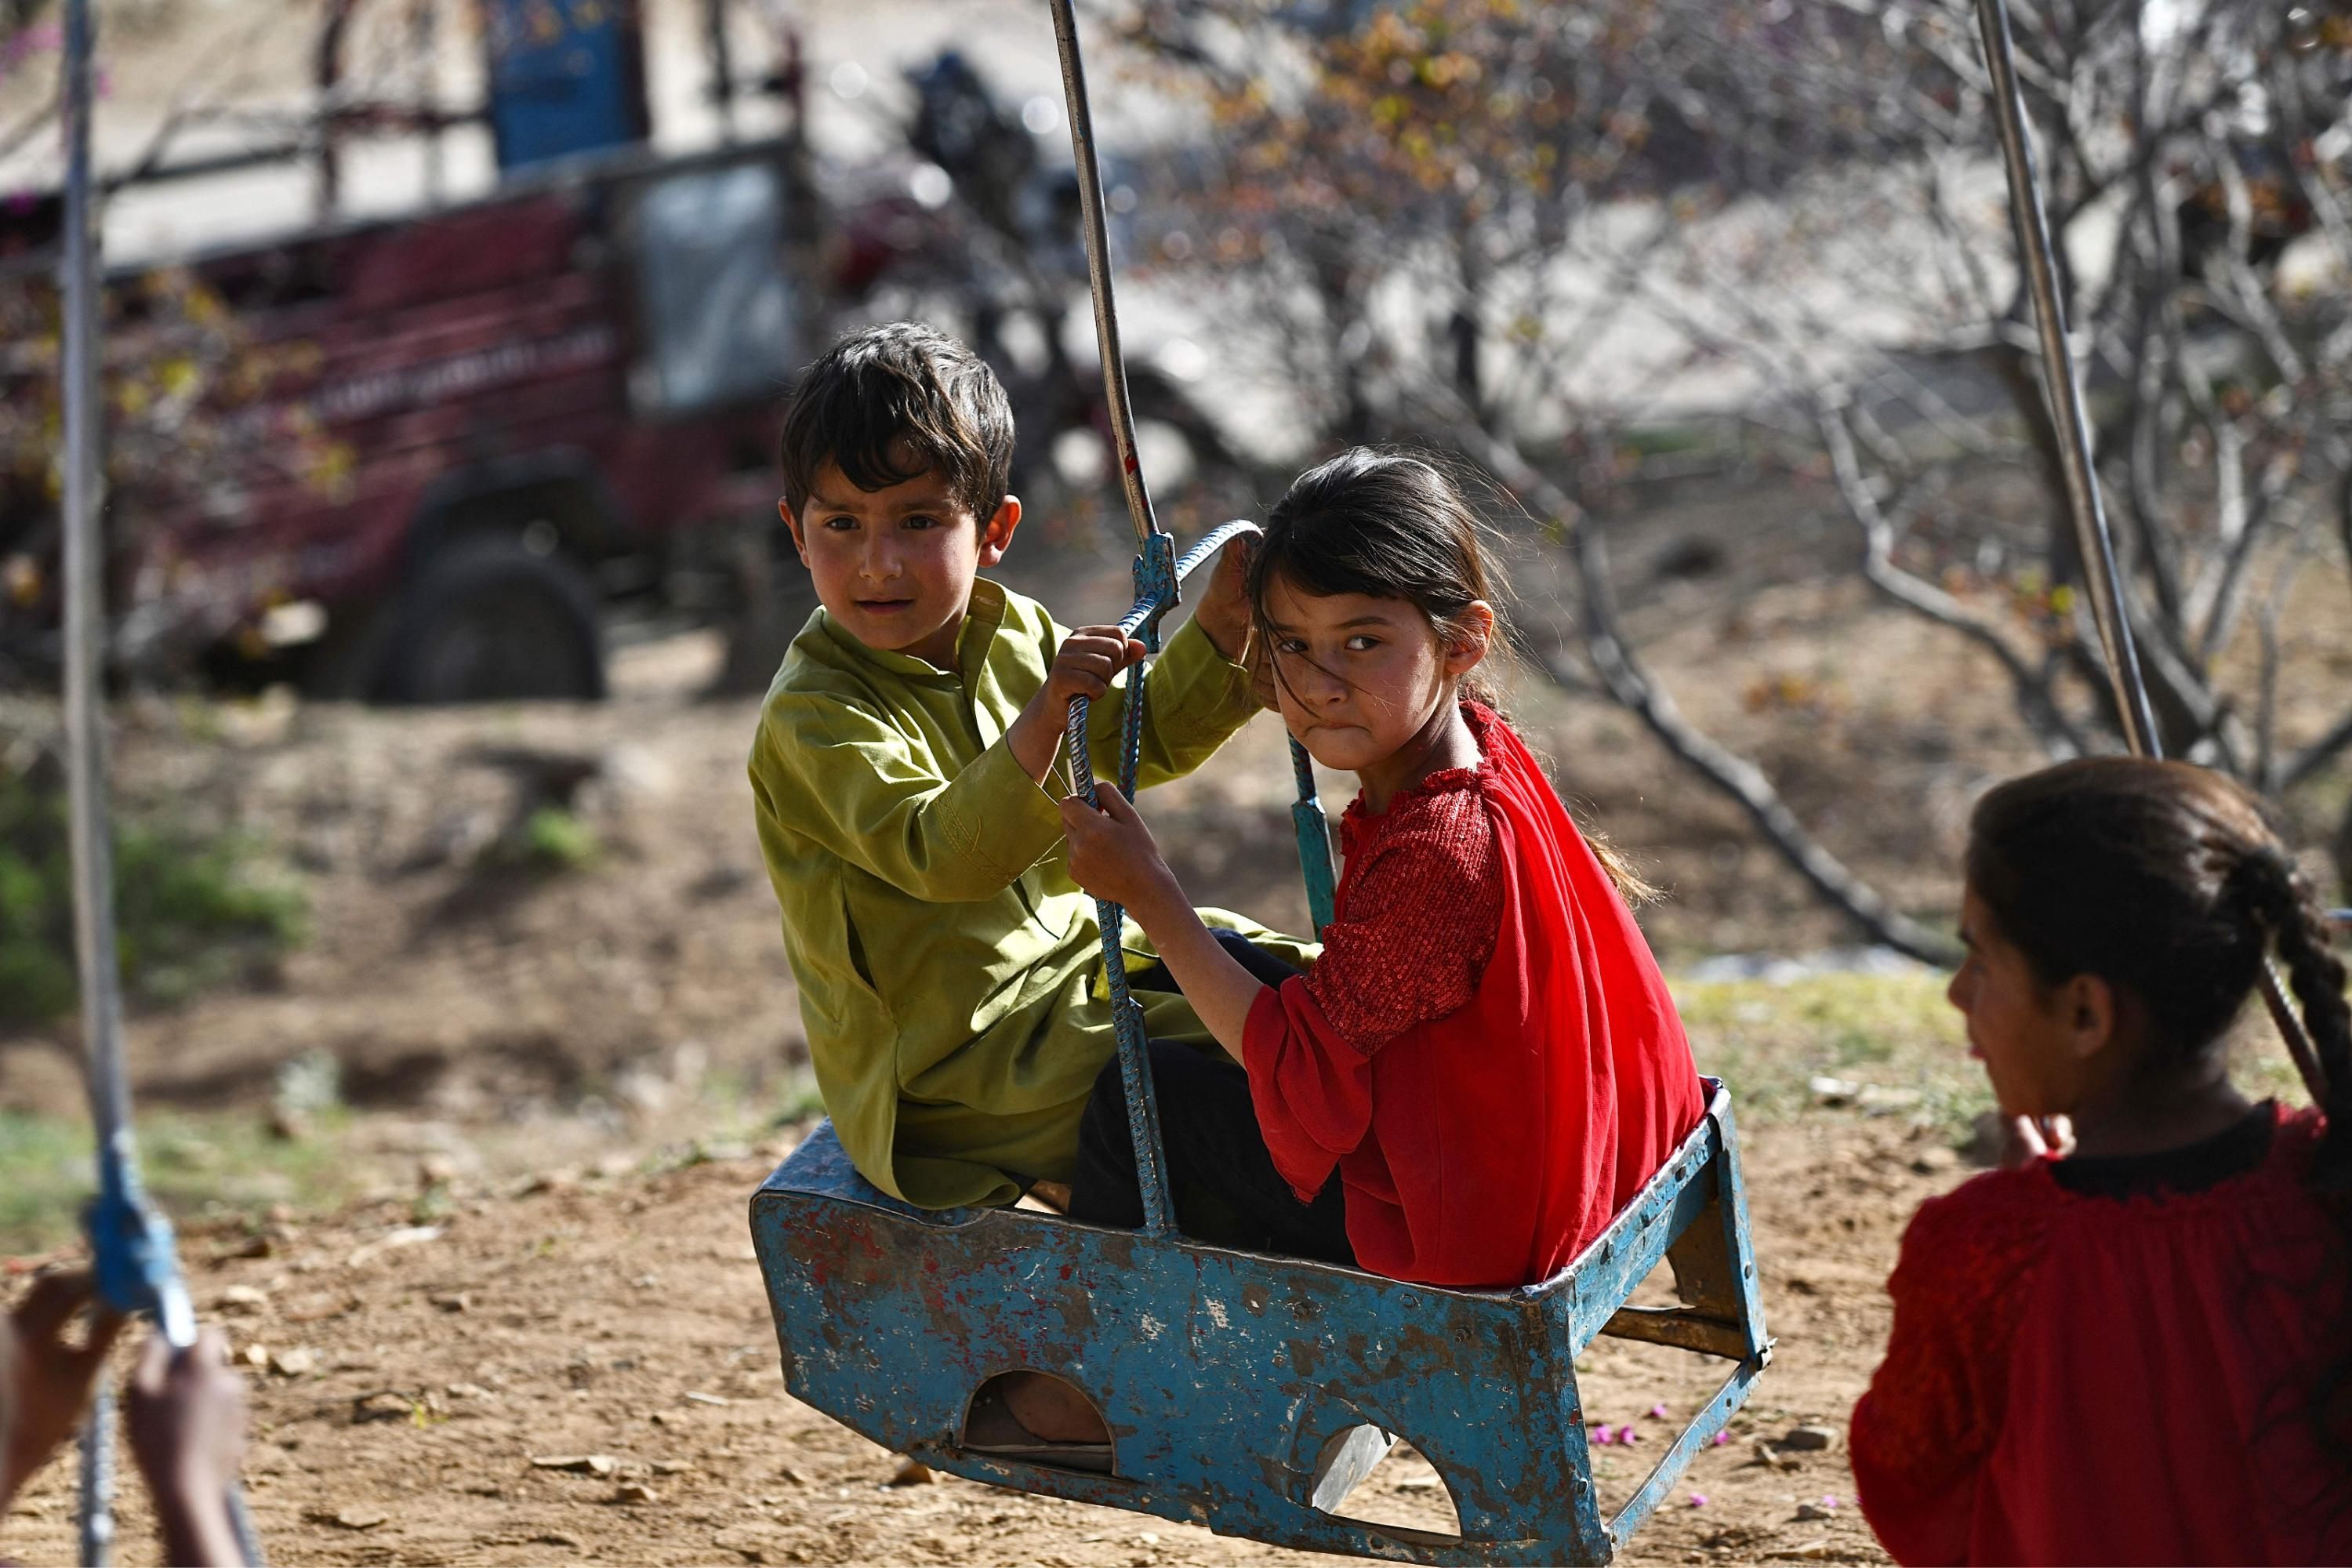 Afghan children ride on a swing